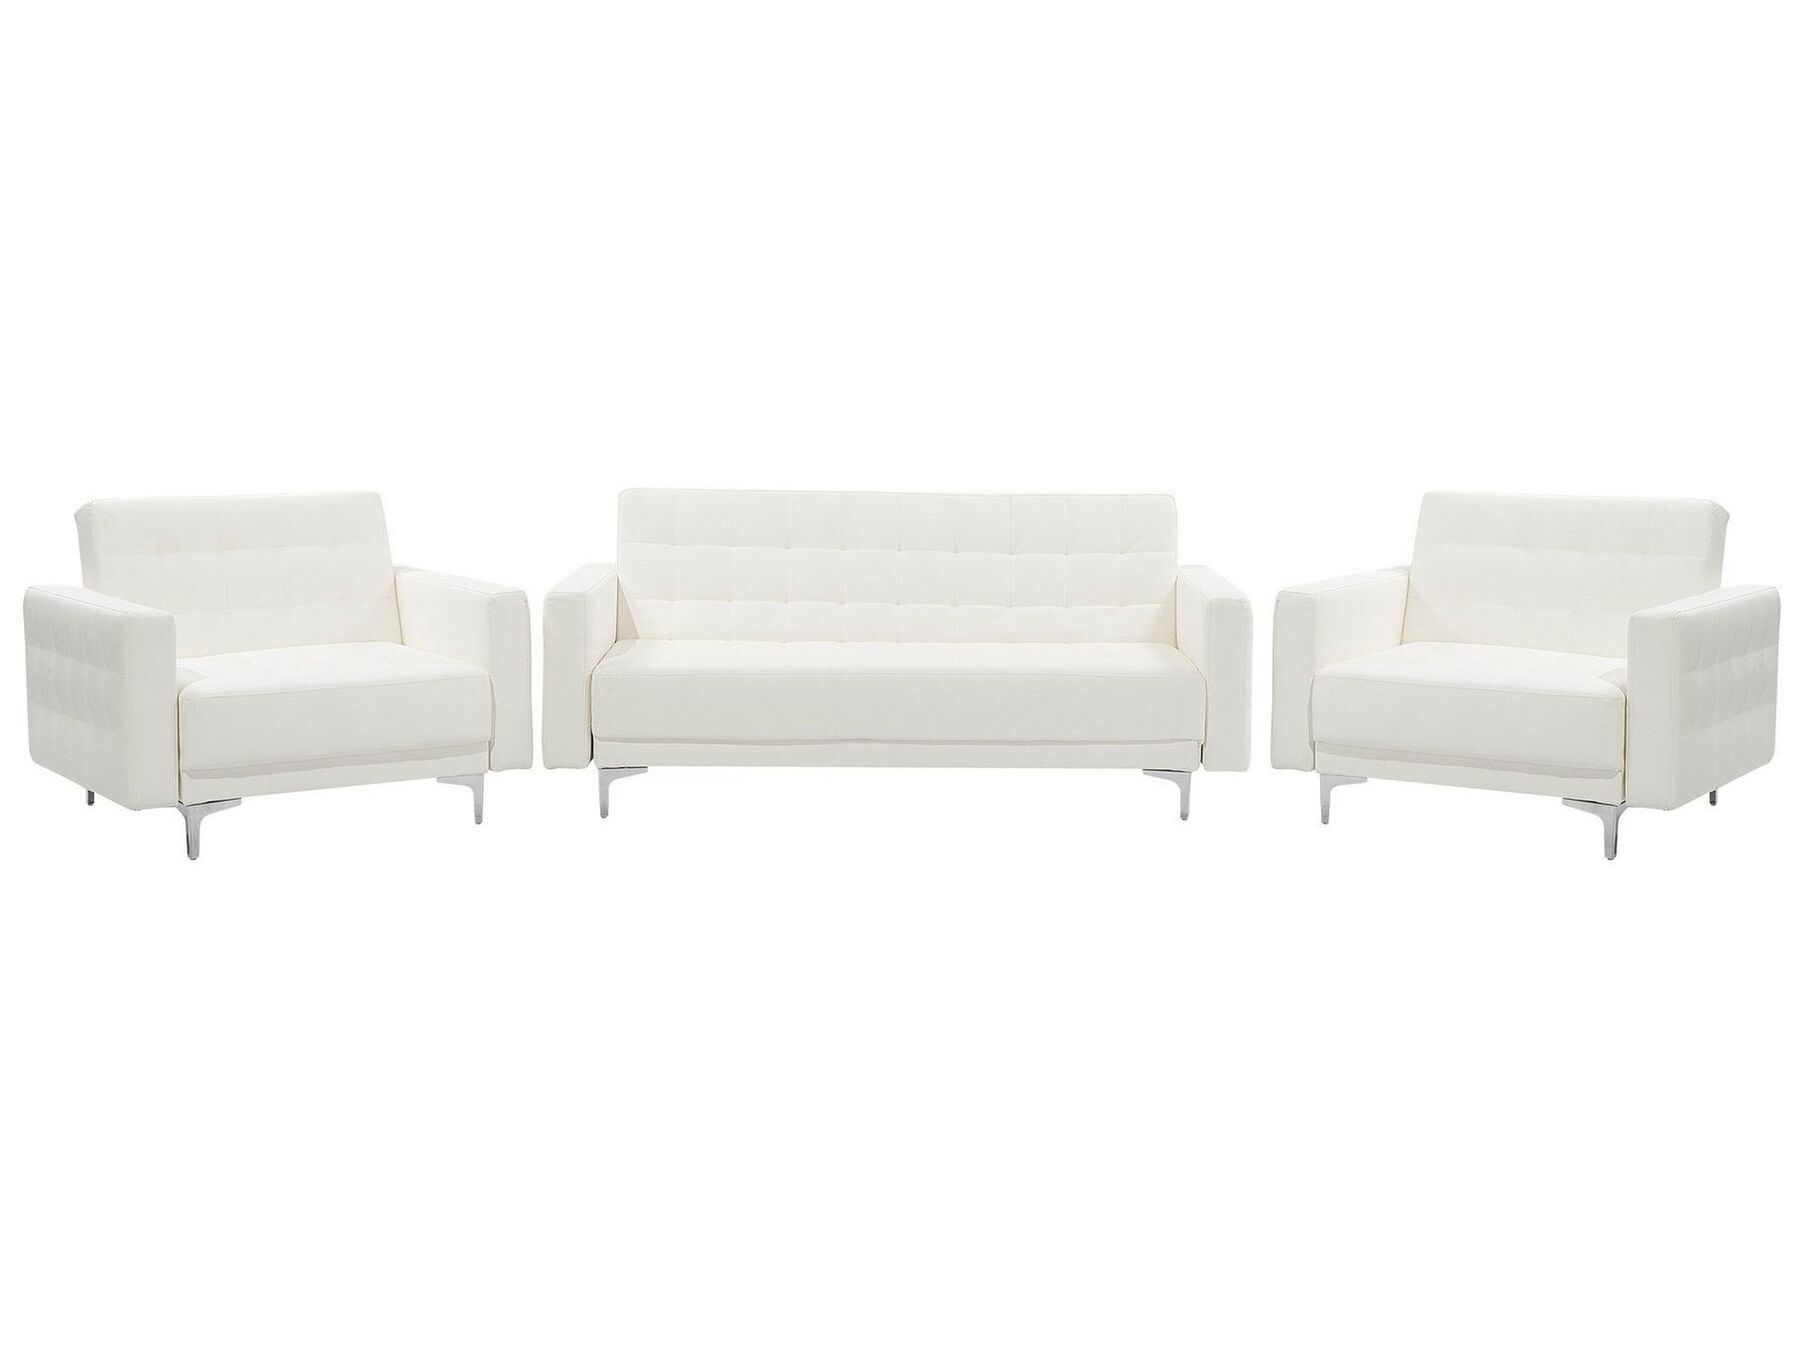 Modular Faux Leather Living Room Set White ABERDEEN_739461